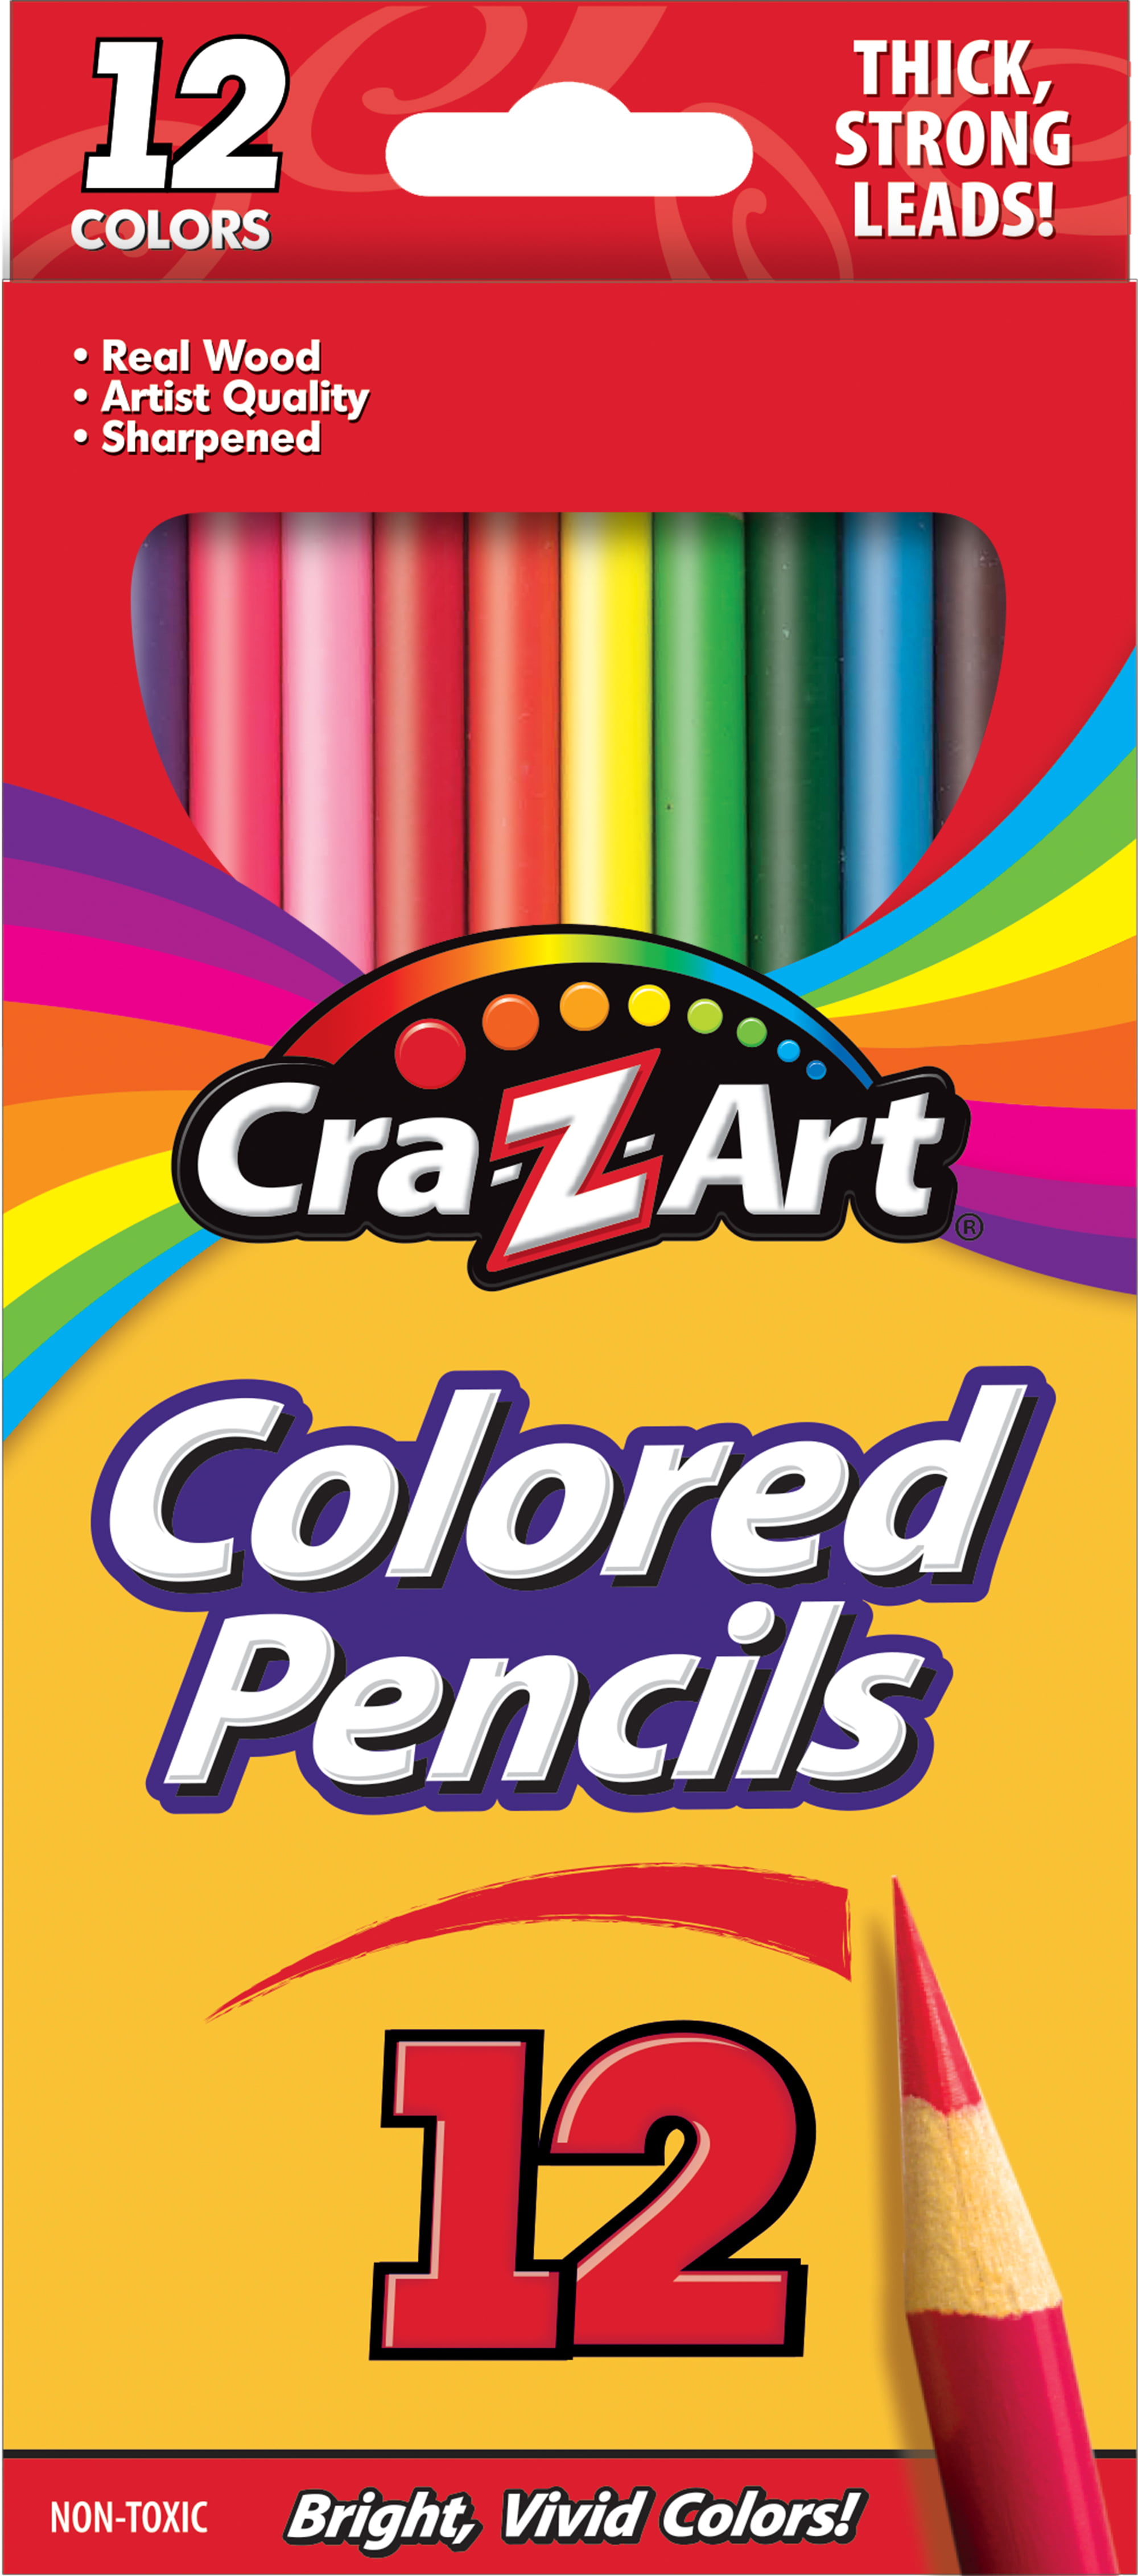 Cra-Z-Art Real Wood Pre-sharpened Strong Colored Pencils - 12 Count $0.75